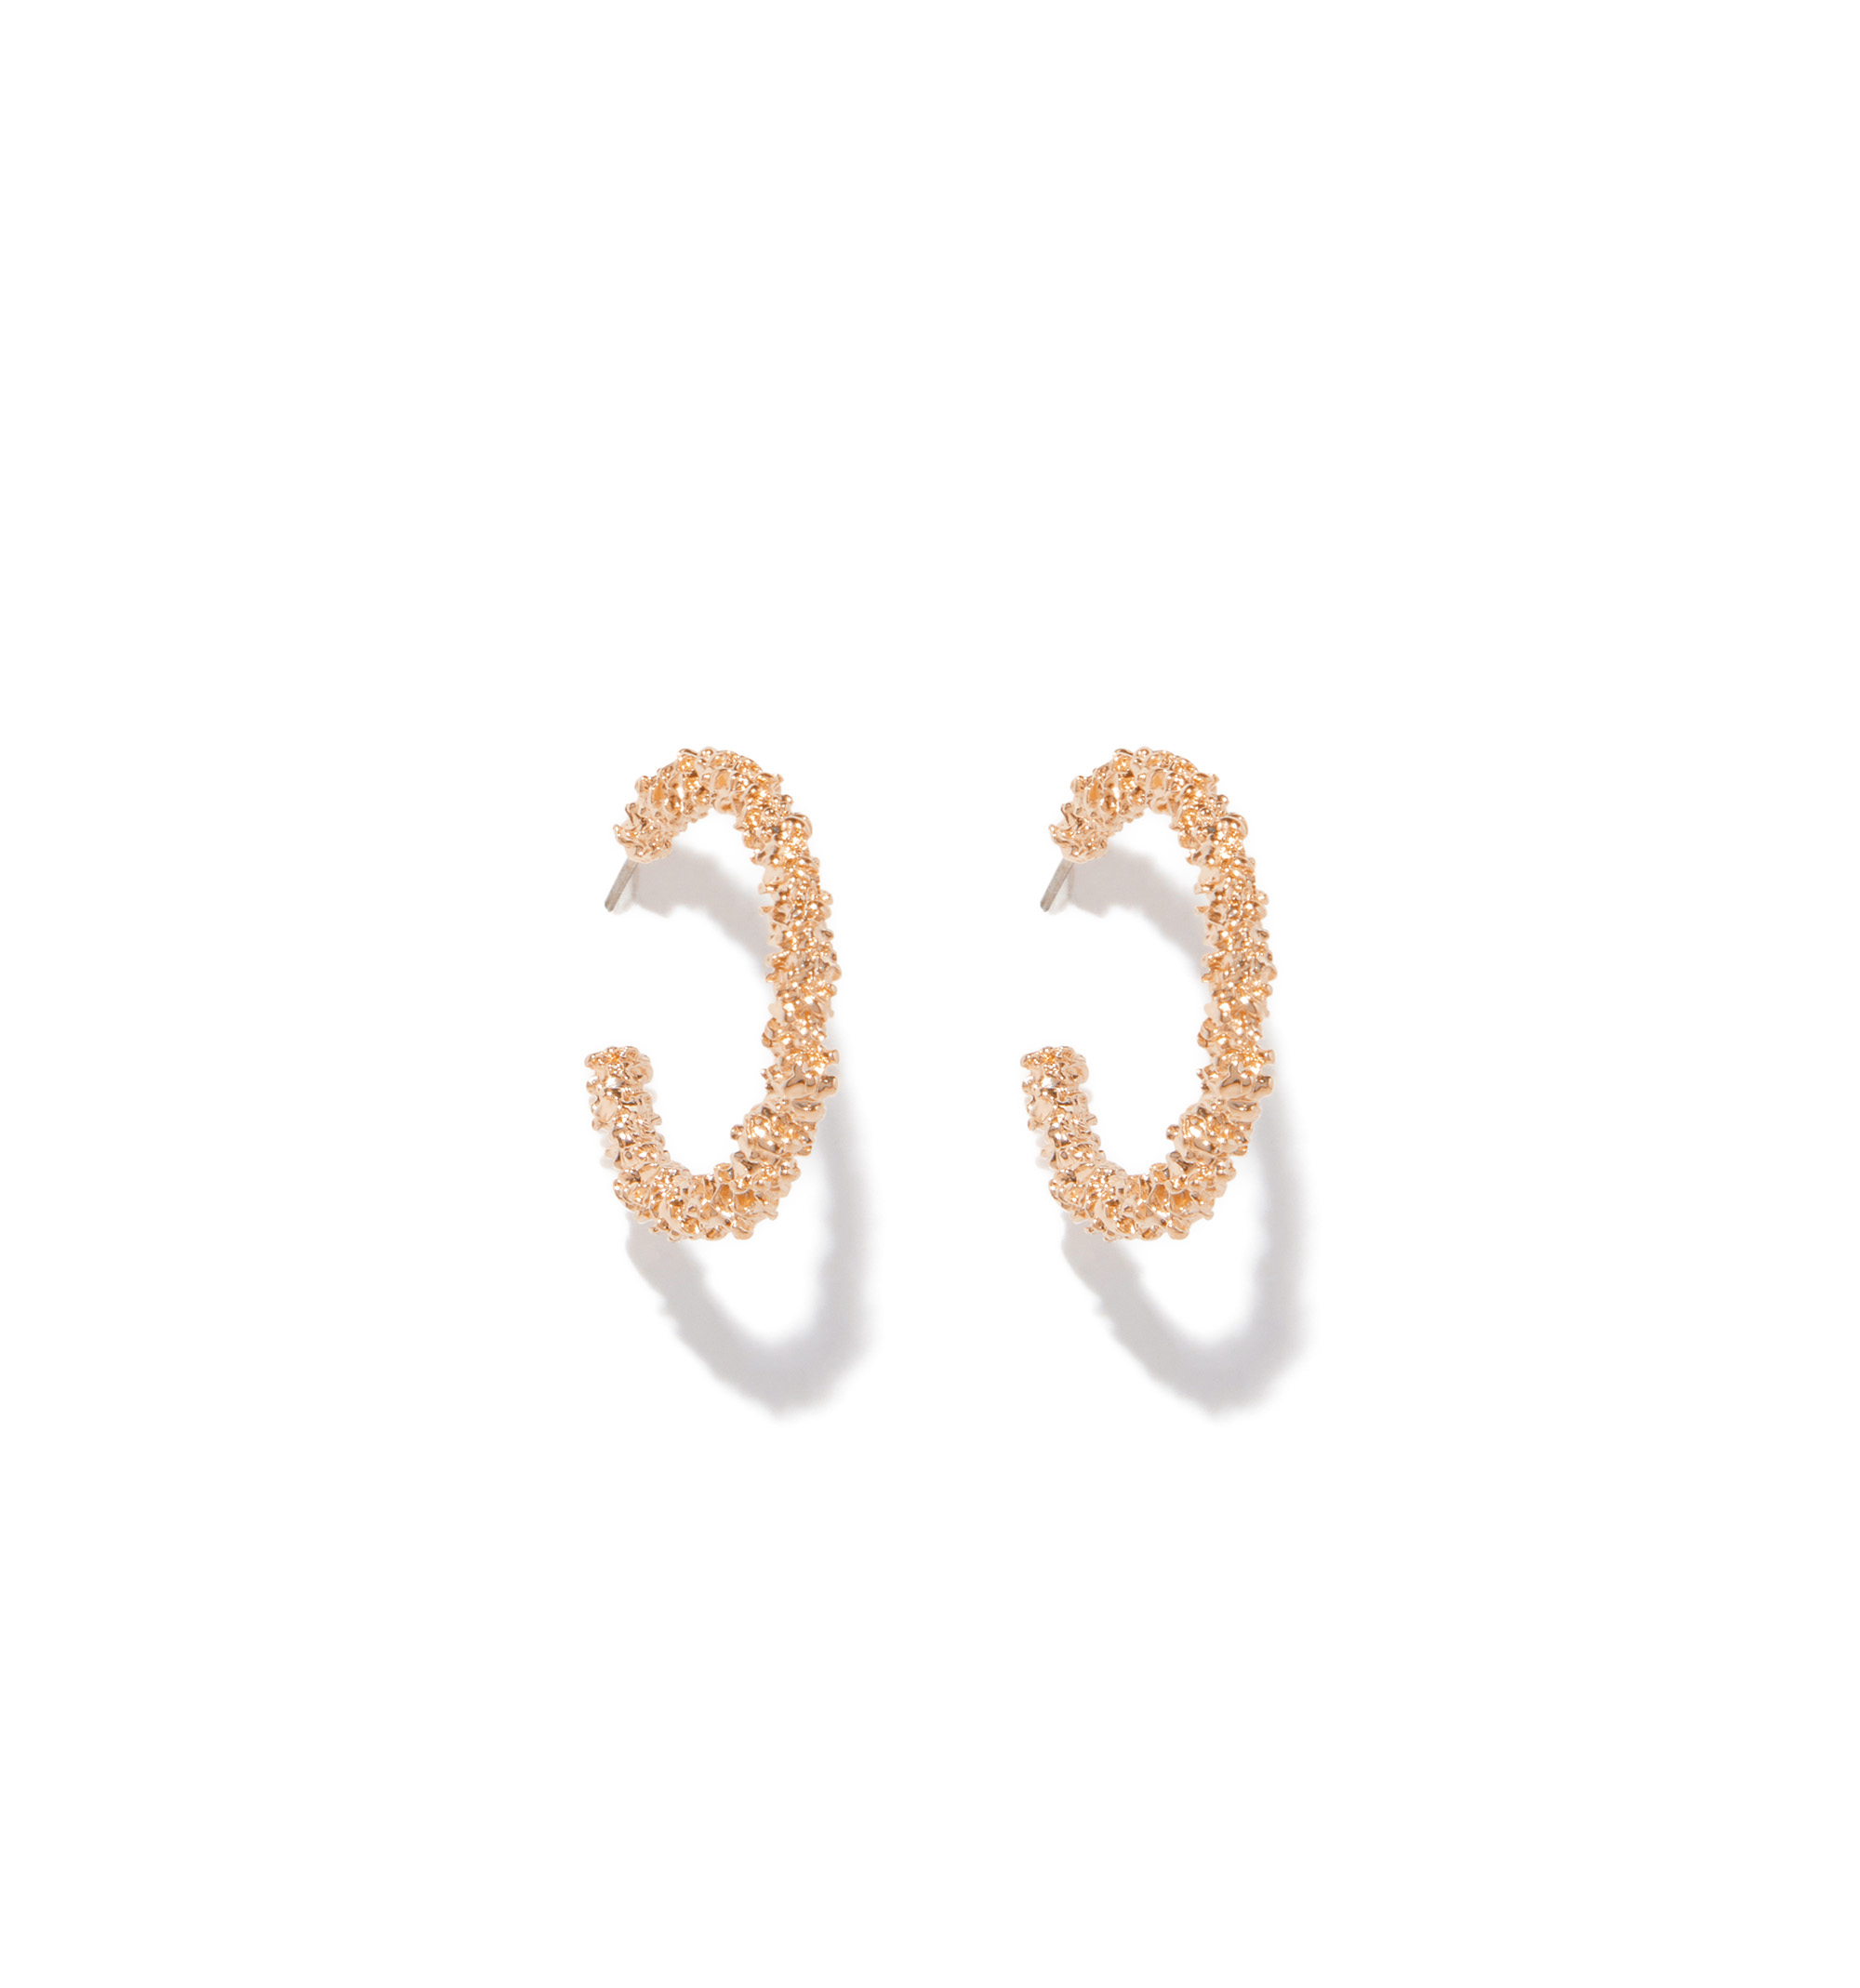 Buy 18K Rose Gold / Tiny Diamond Star Stud Earrings / Star Earrings / Pave  Diamond / Next Day Shipping Online in India - Etsy